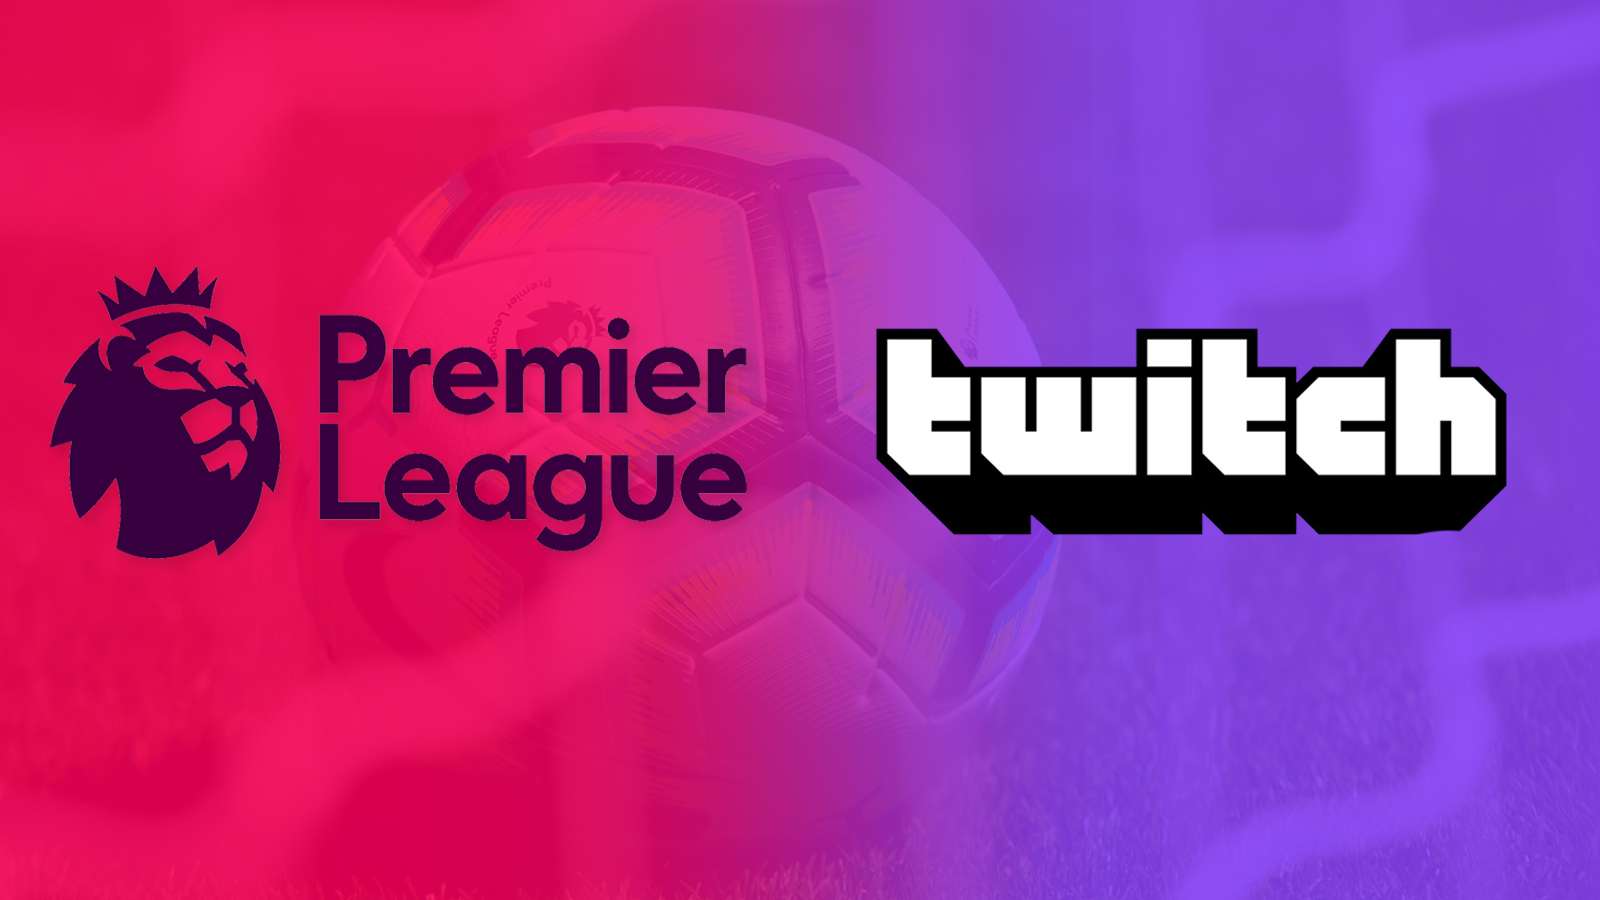 How to watch Premier League on Twitch